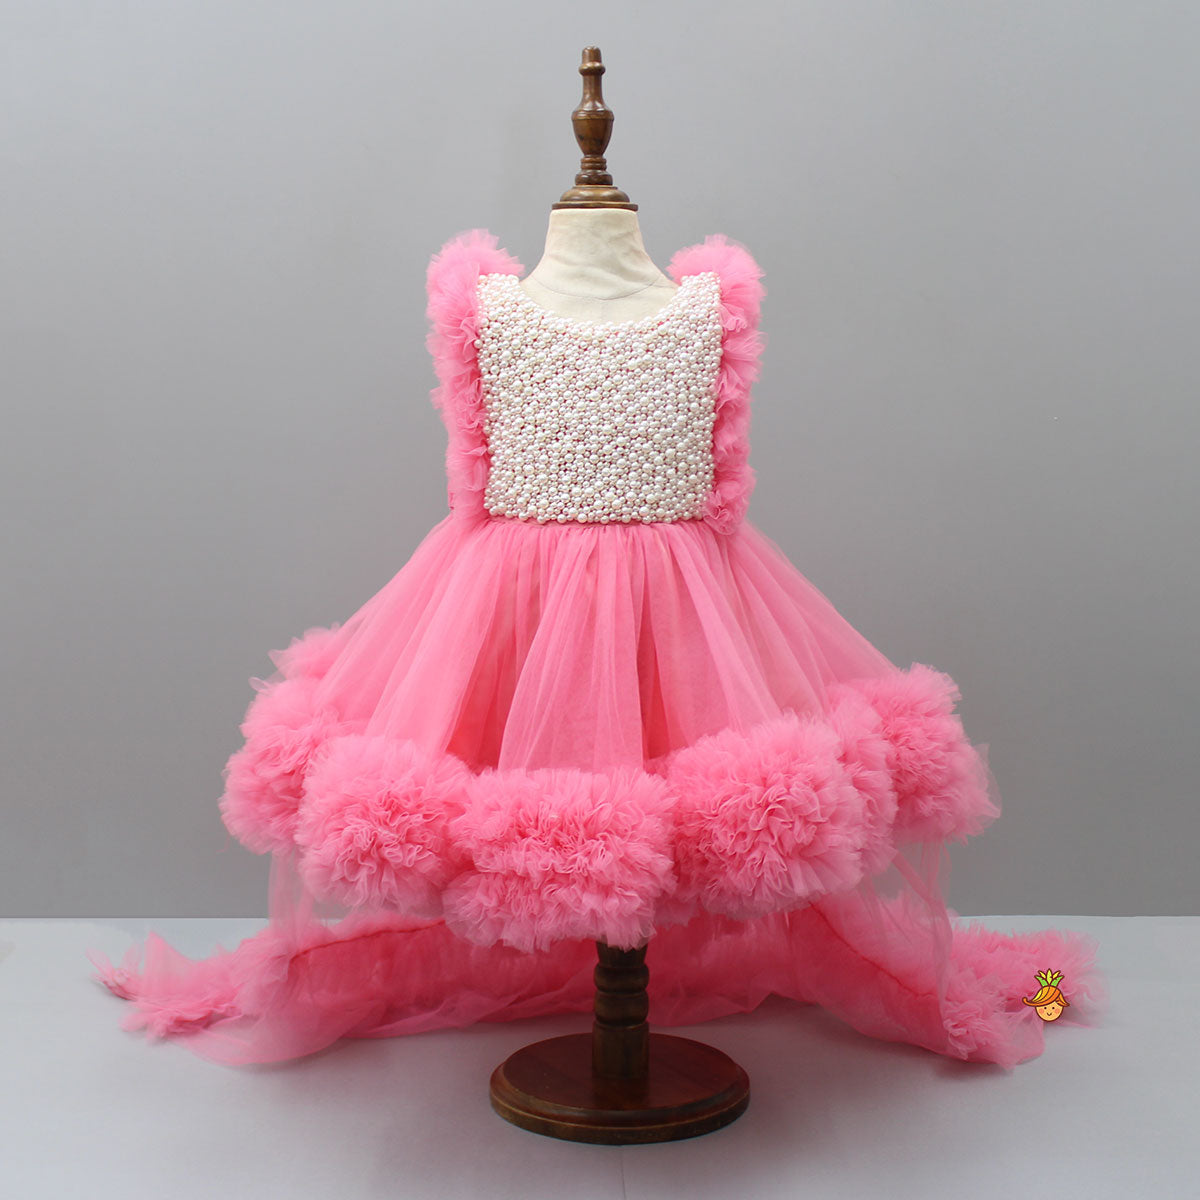 Embroidered Yoke Ruffle Hem Pink Dress With Detachable Trail And Matching Hair Clip